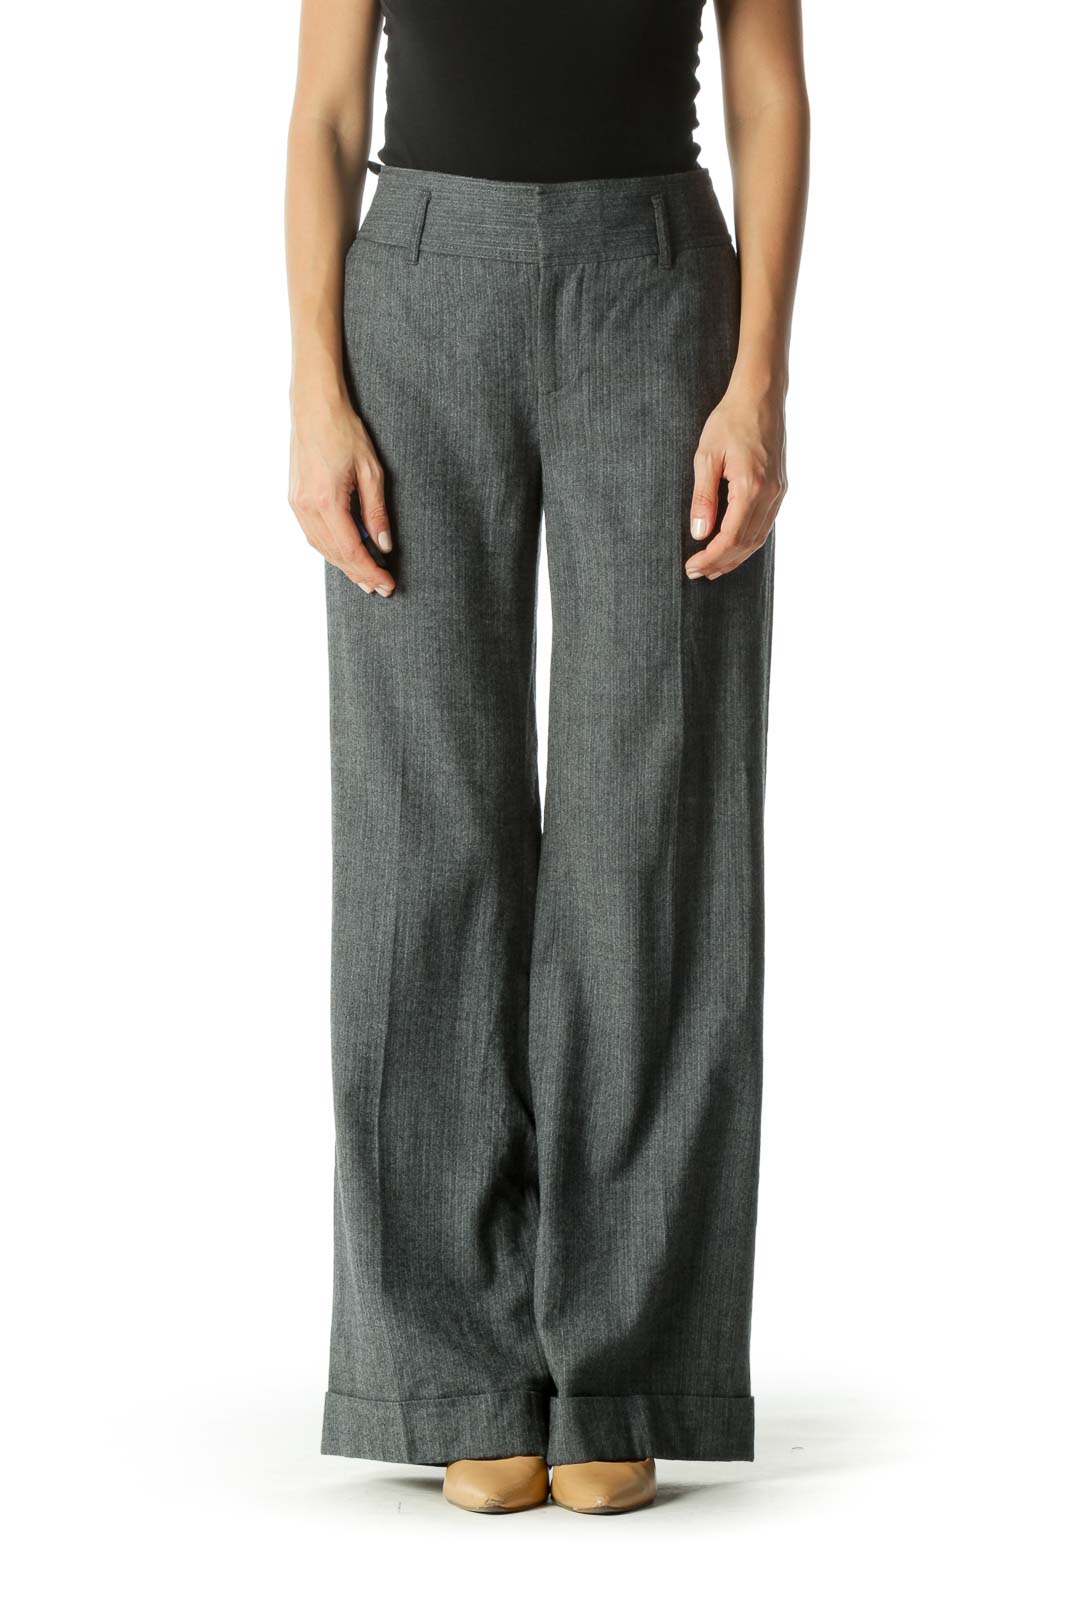 Gray Wool Blend Pocketed Textured Pants Front